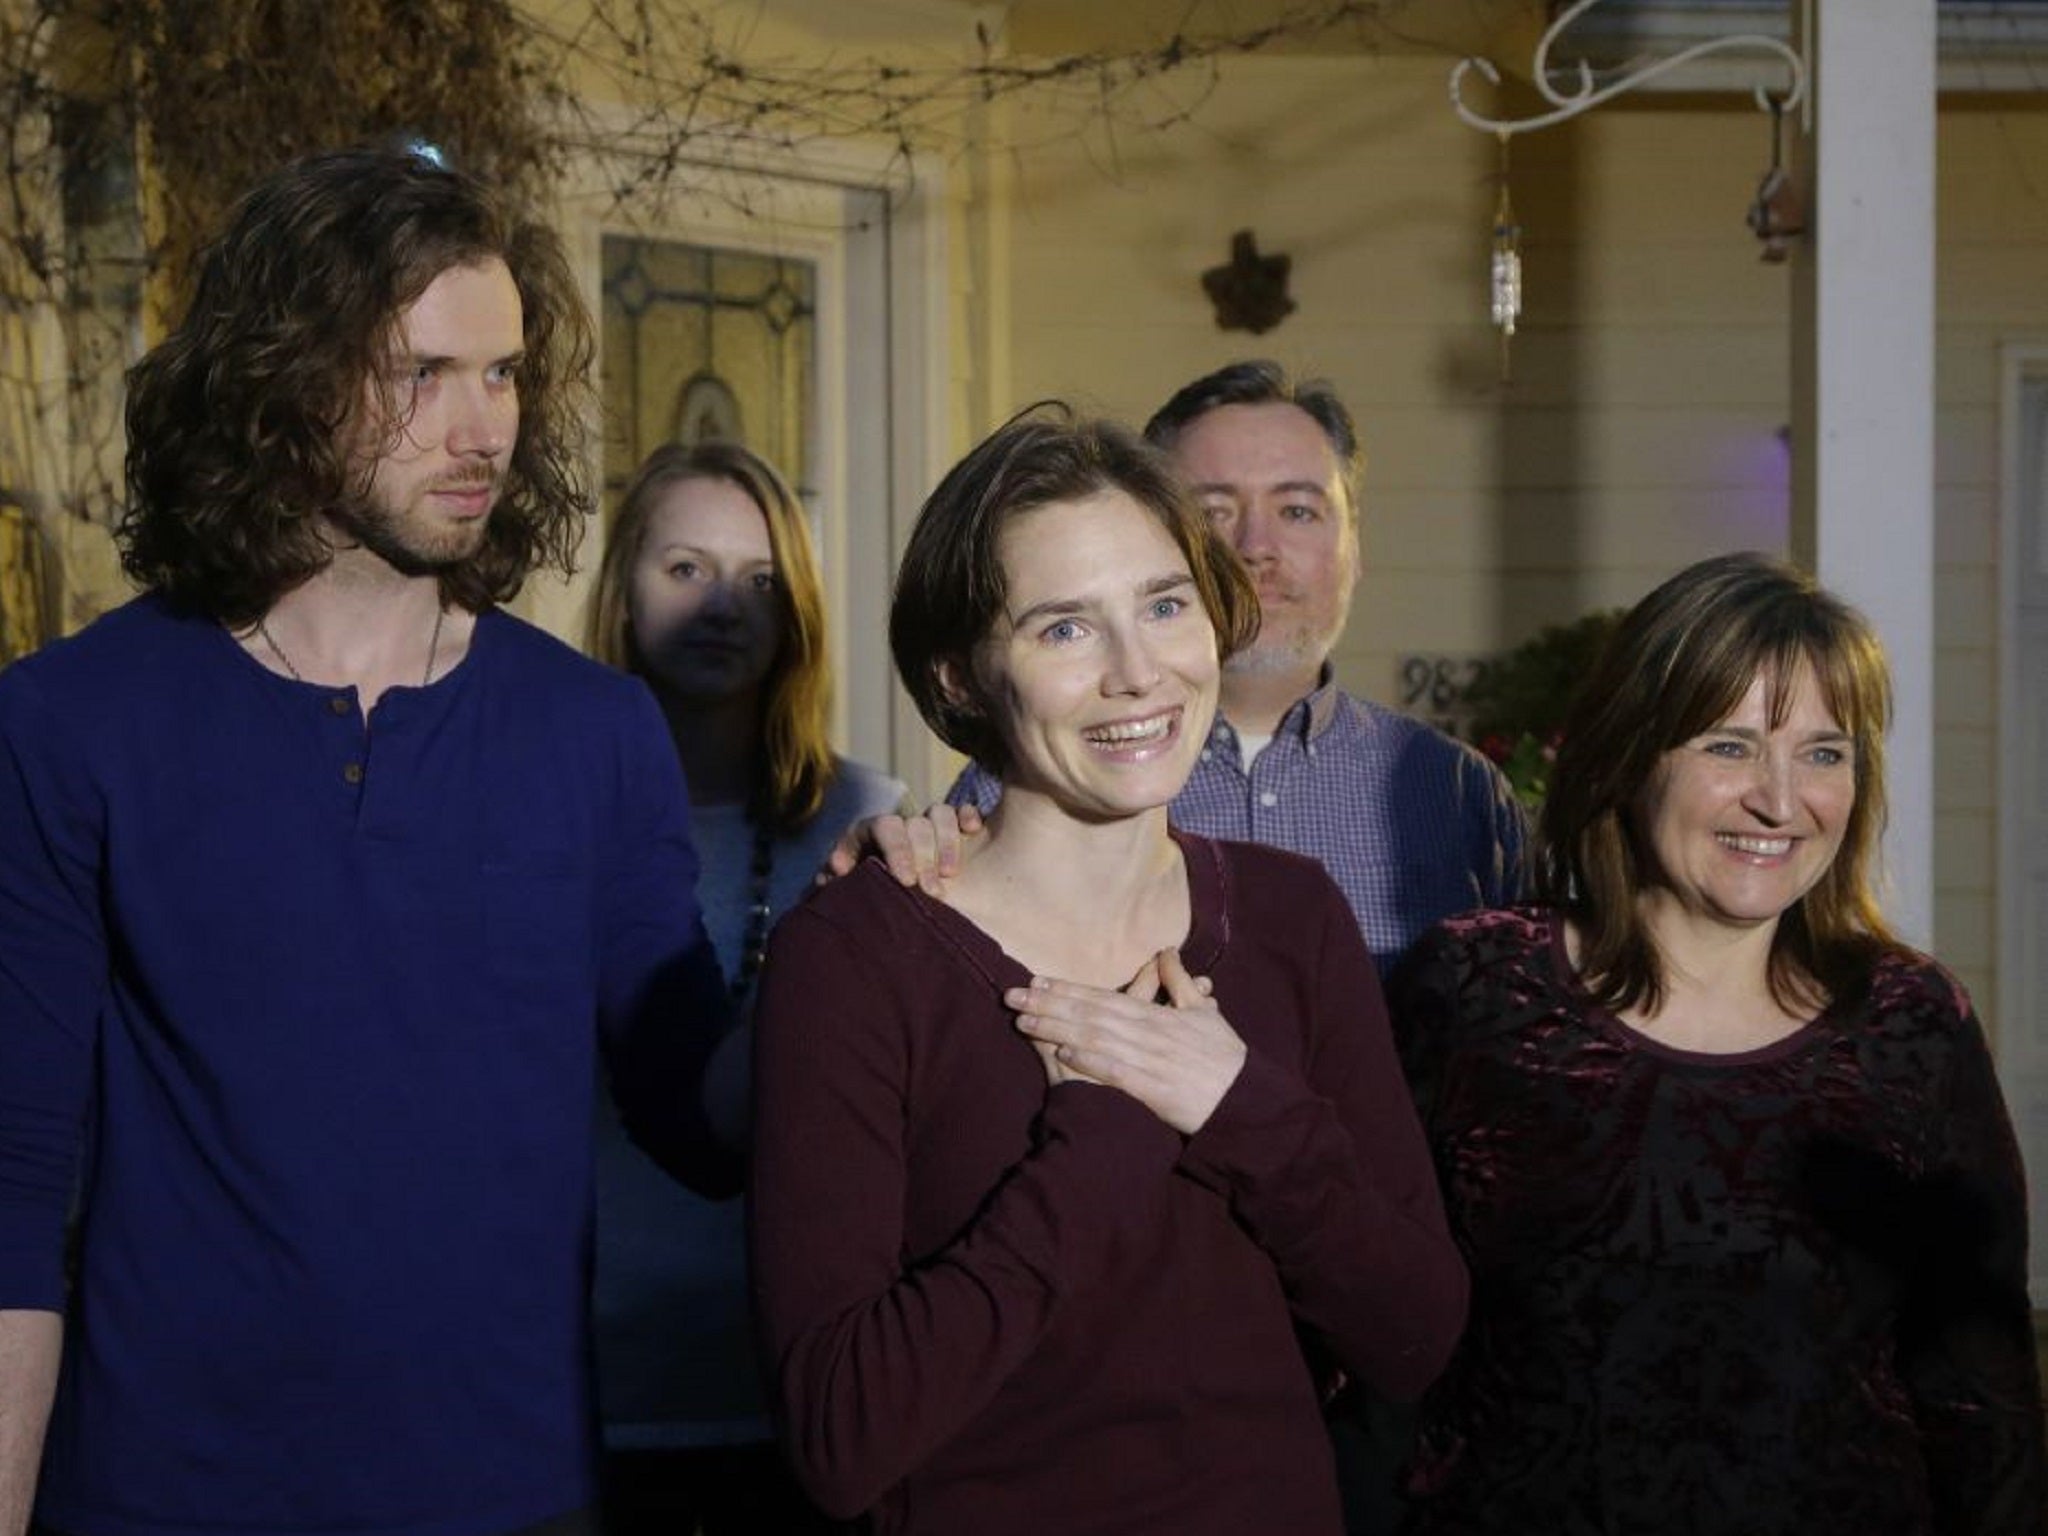 Amanda Knox and her former boyfriend Raffaelle Sollecito (not pictured) were finally acquitted in March 2015